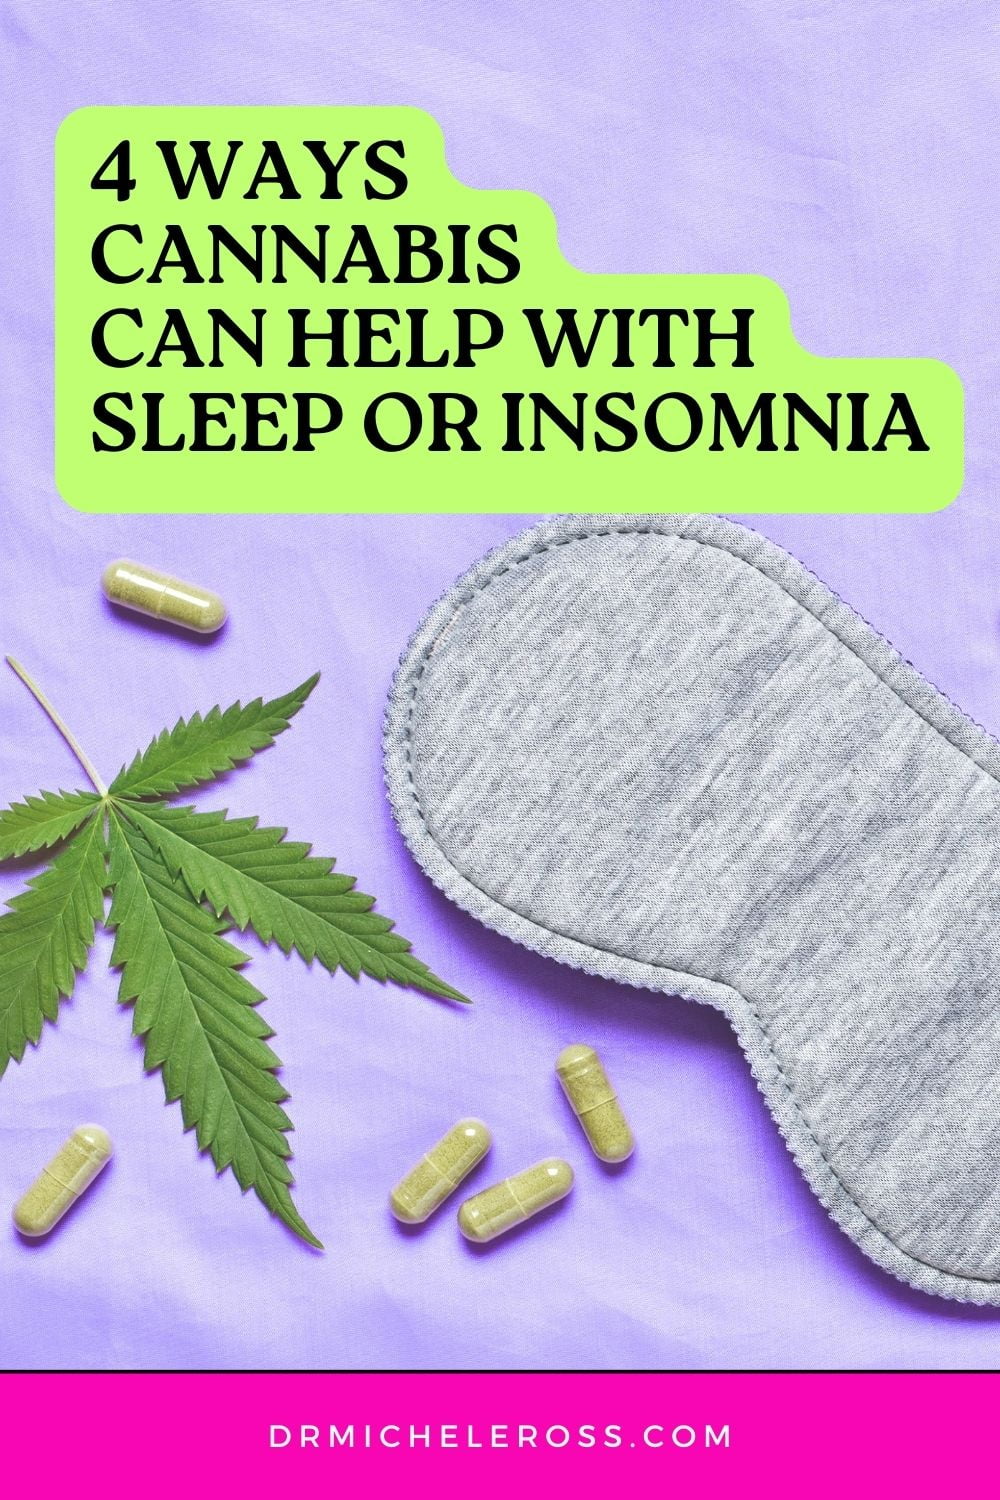 4 Ways Cannabis Can Help With Sleep or Insomnia | Dr. Michele Ross